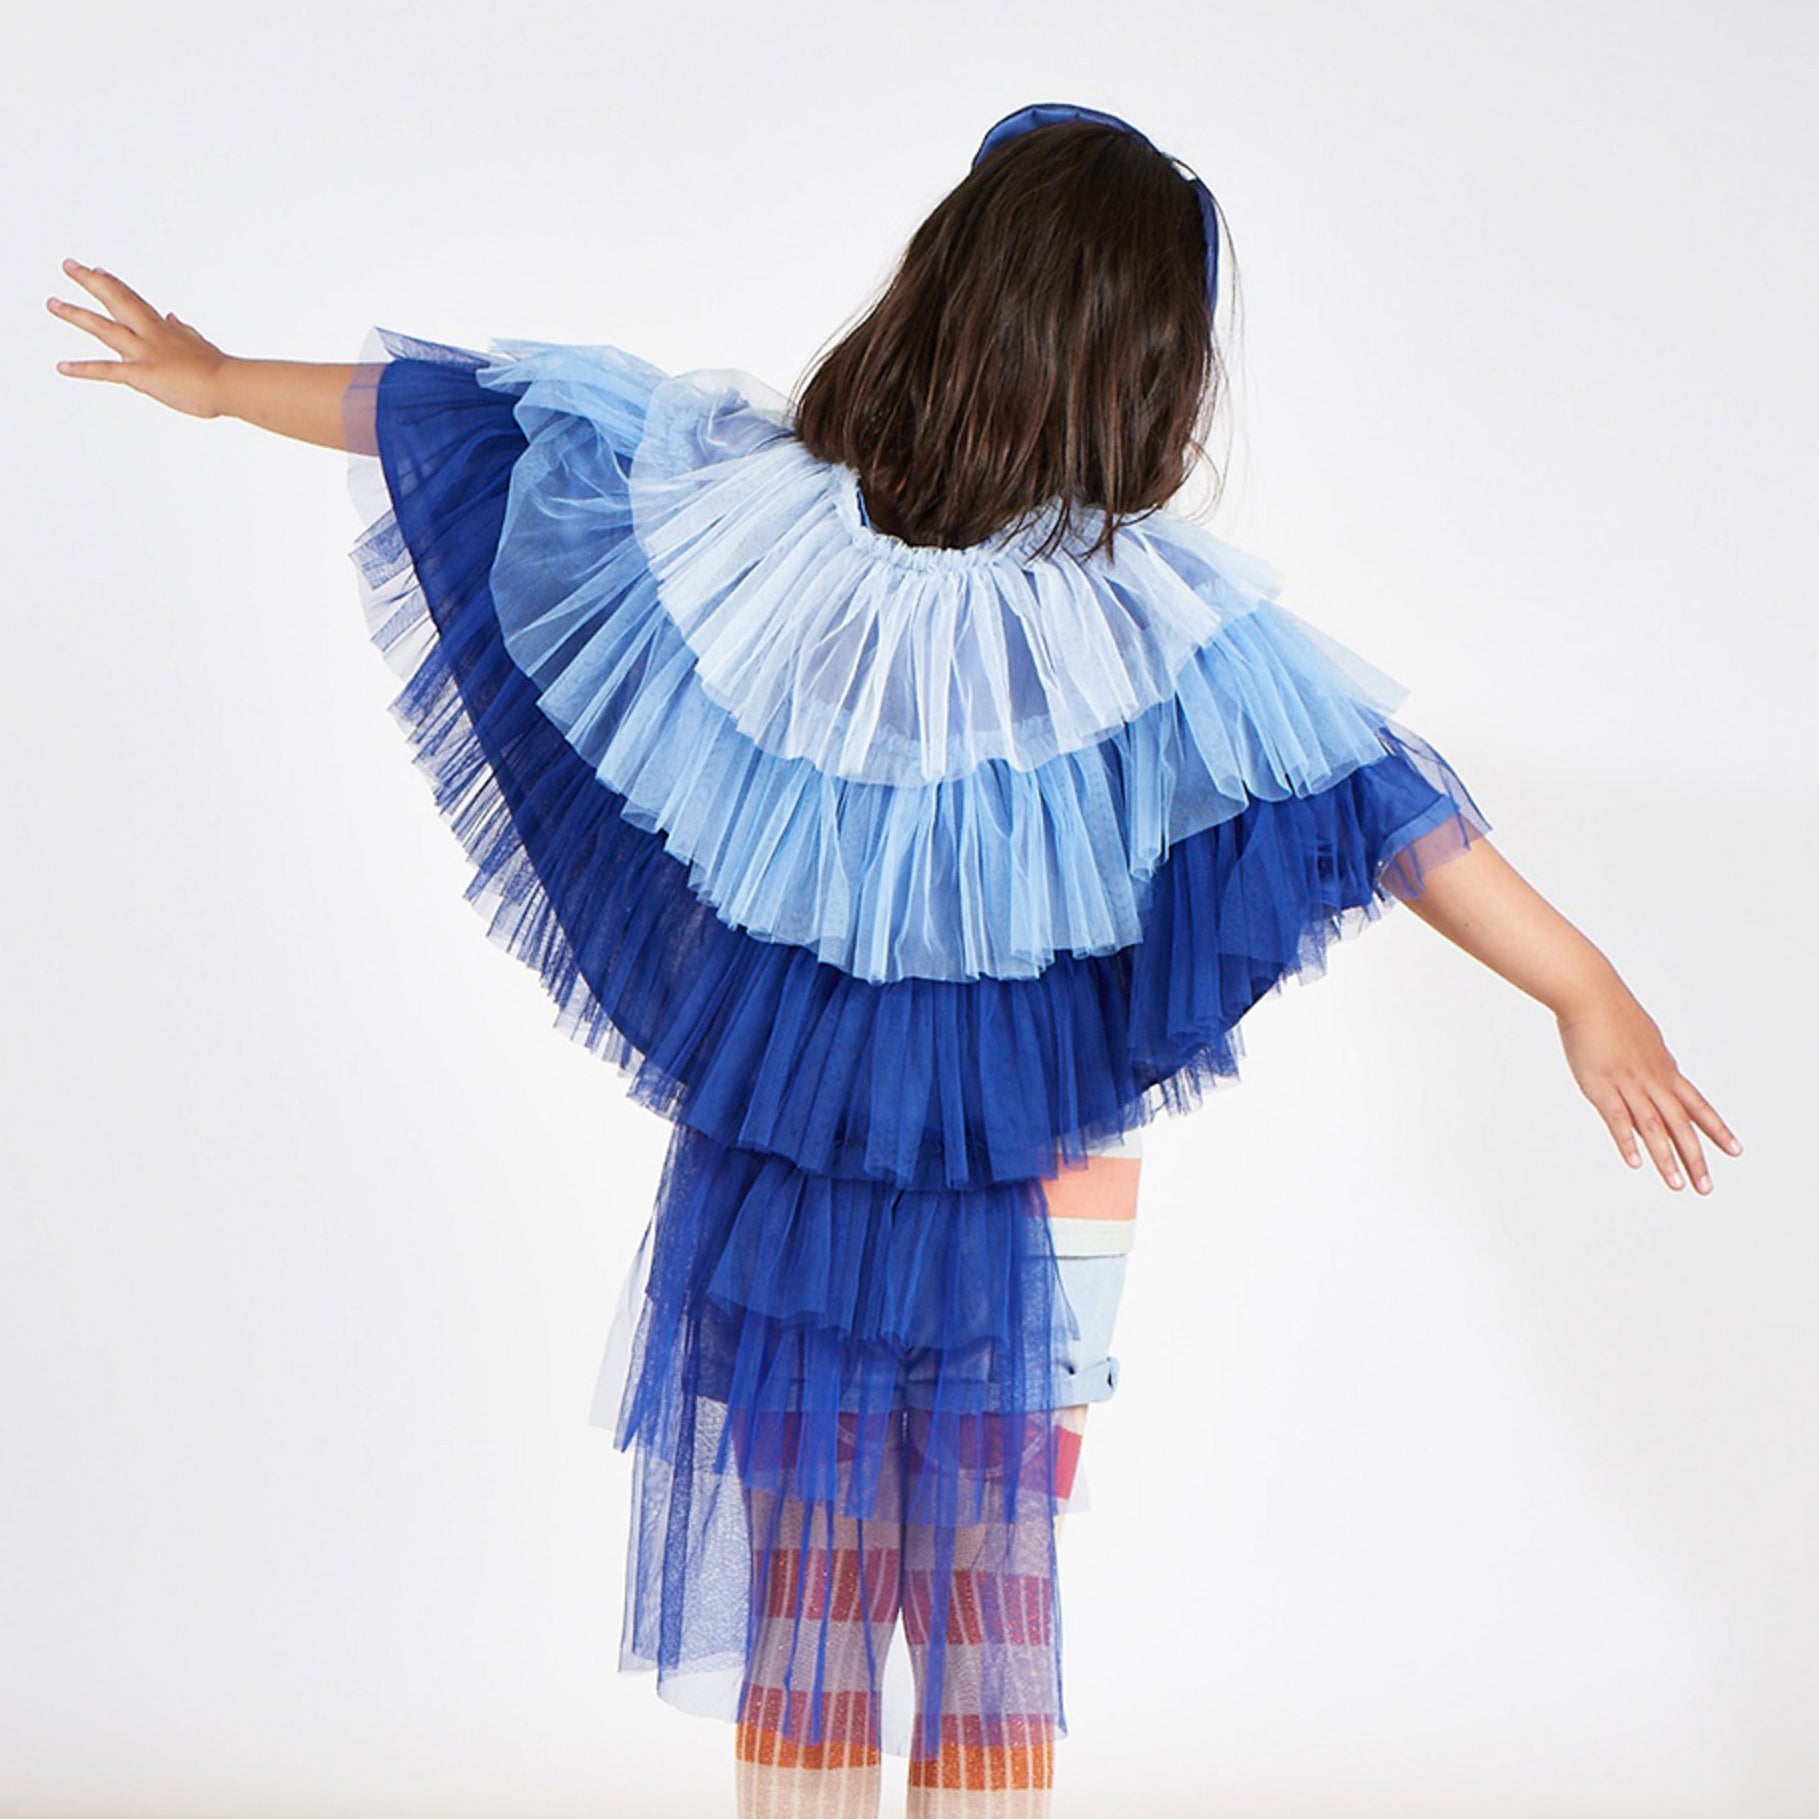 Our beautiful bird costume is perfect for kids dress up or as a bird Halloween costume.